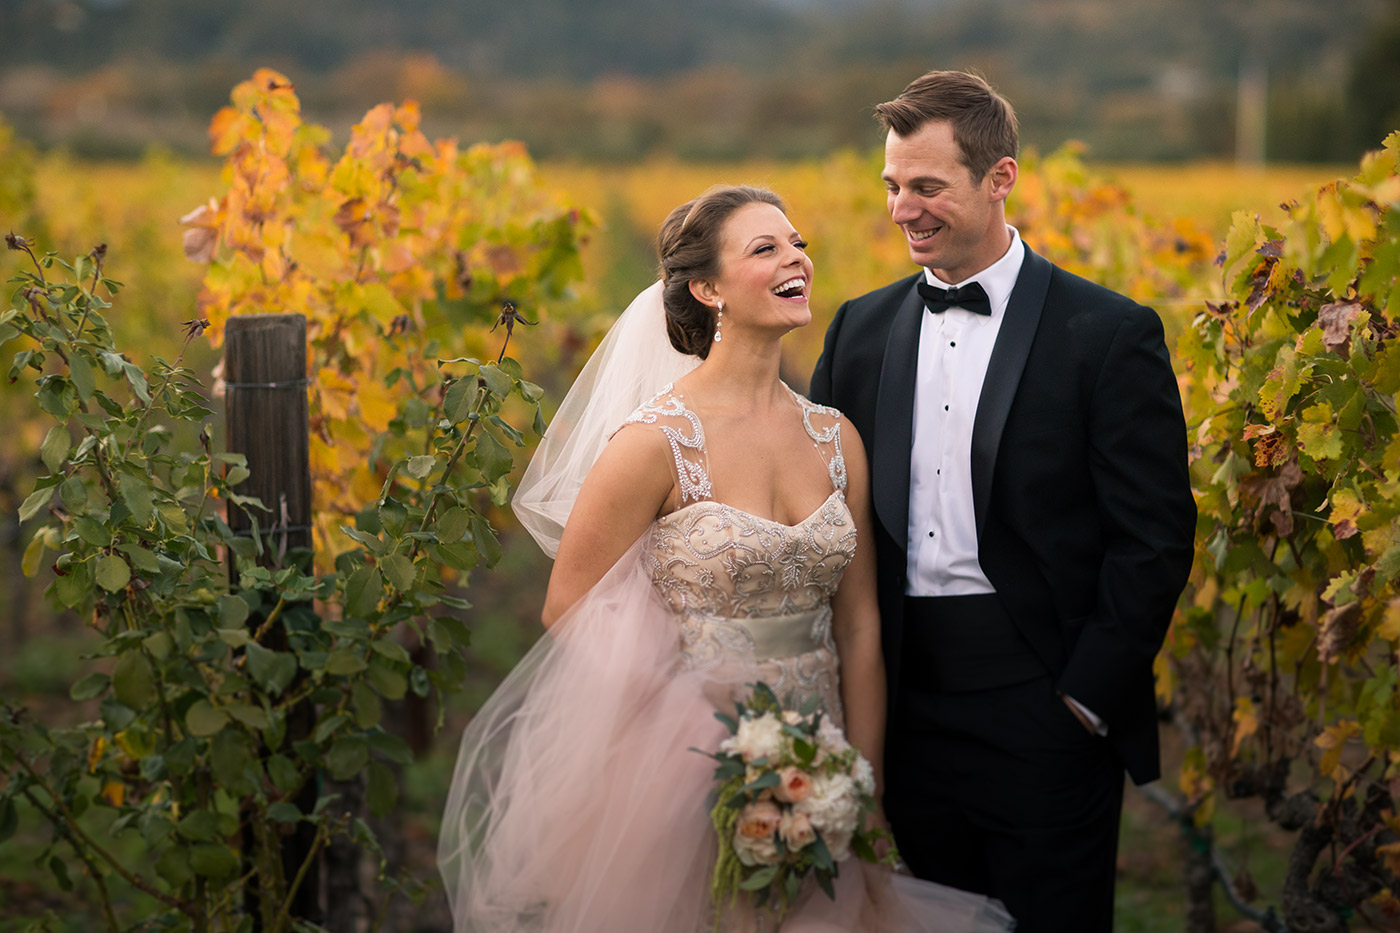 Bride and groom in a vineyard across the Culinary Institute of America, during their wedding there.